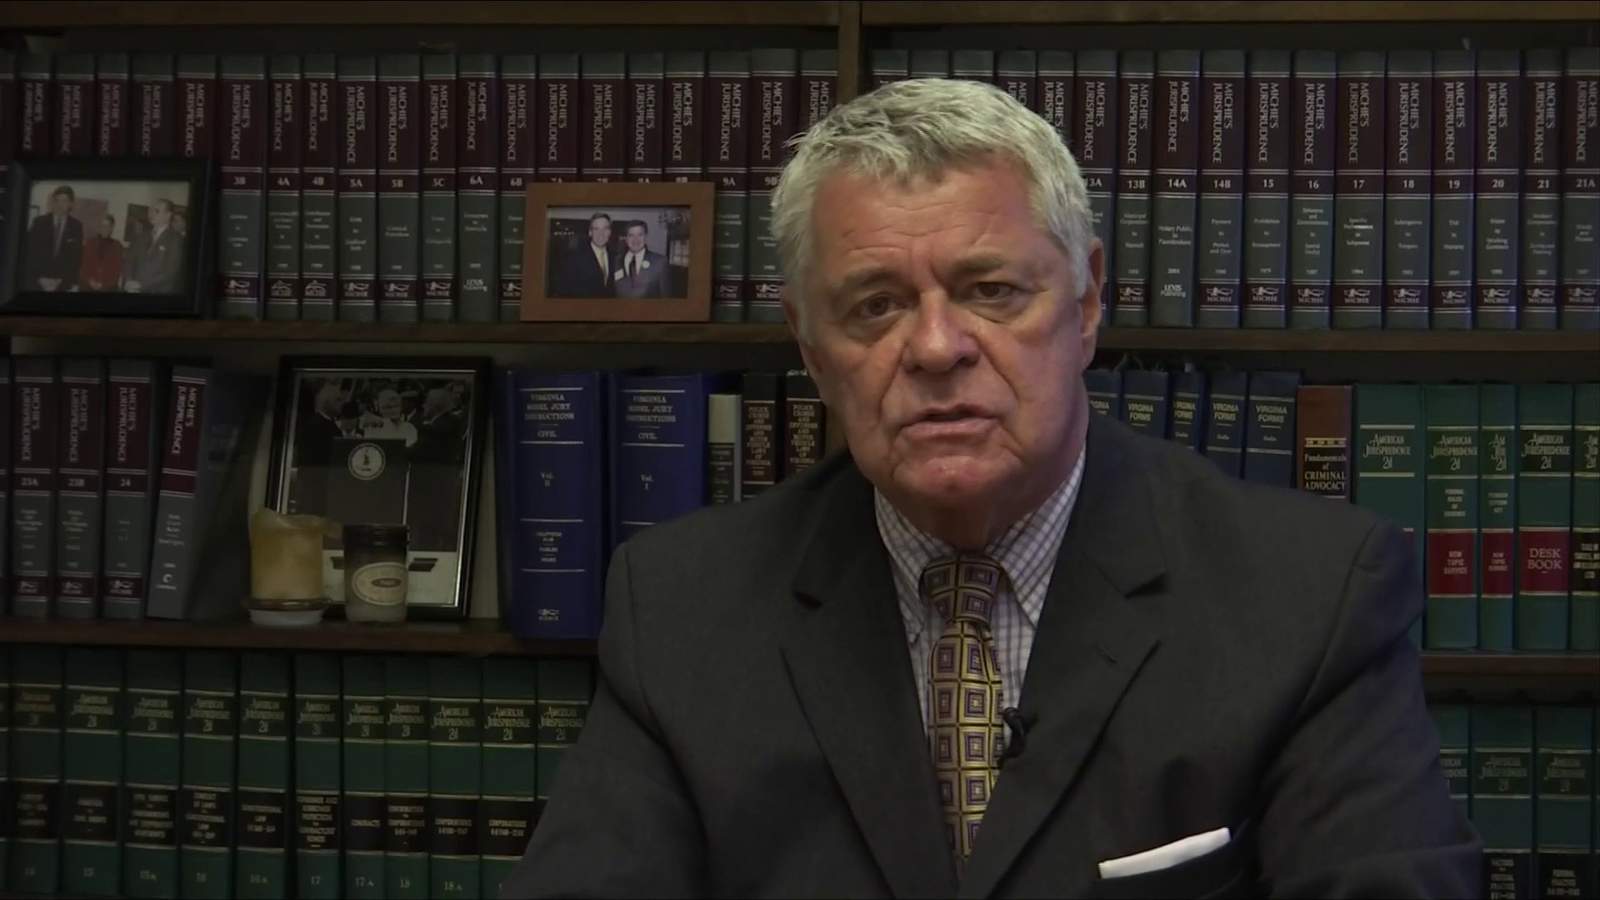 ‘I’m excited about going back’: former Roanoke mayor David Bowers runs for office again